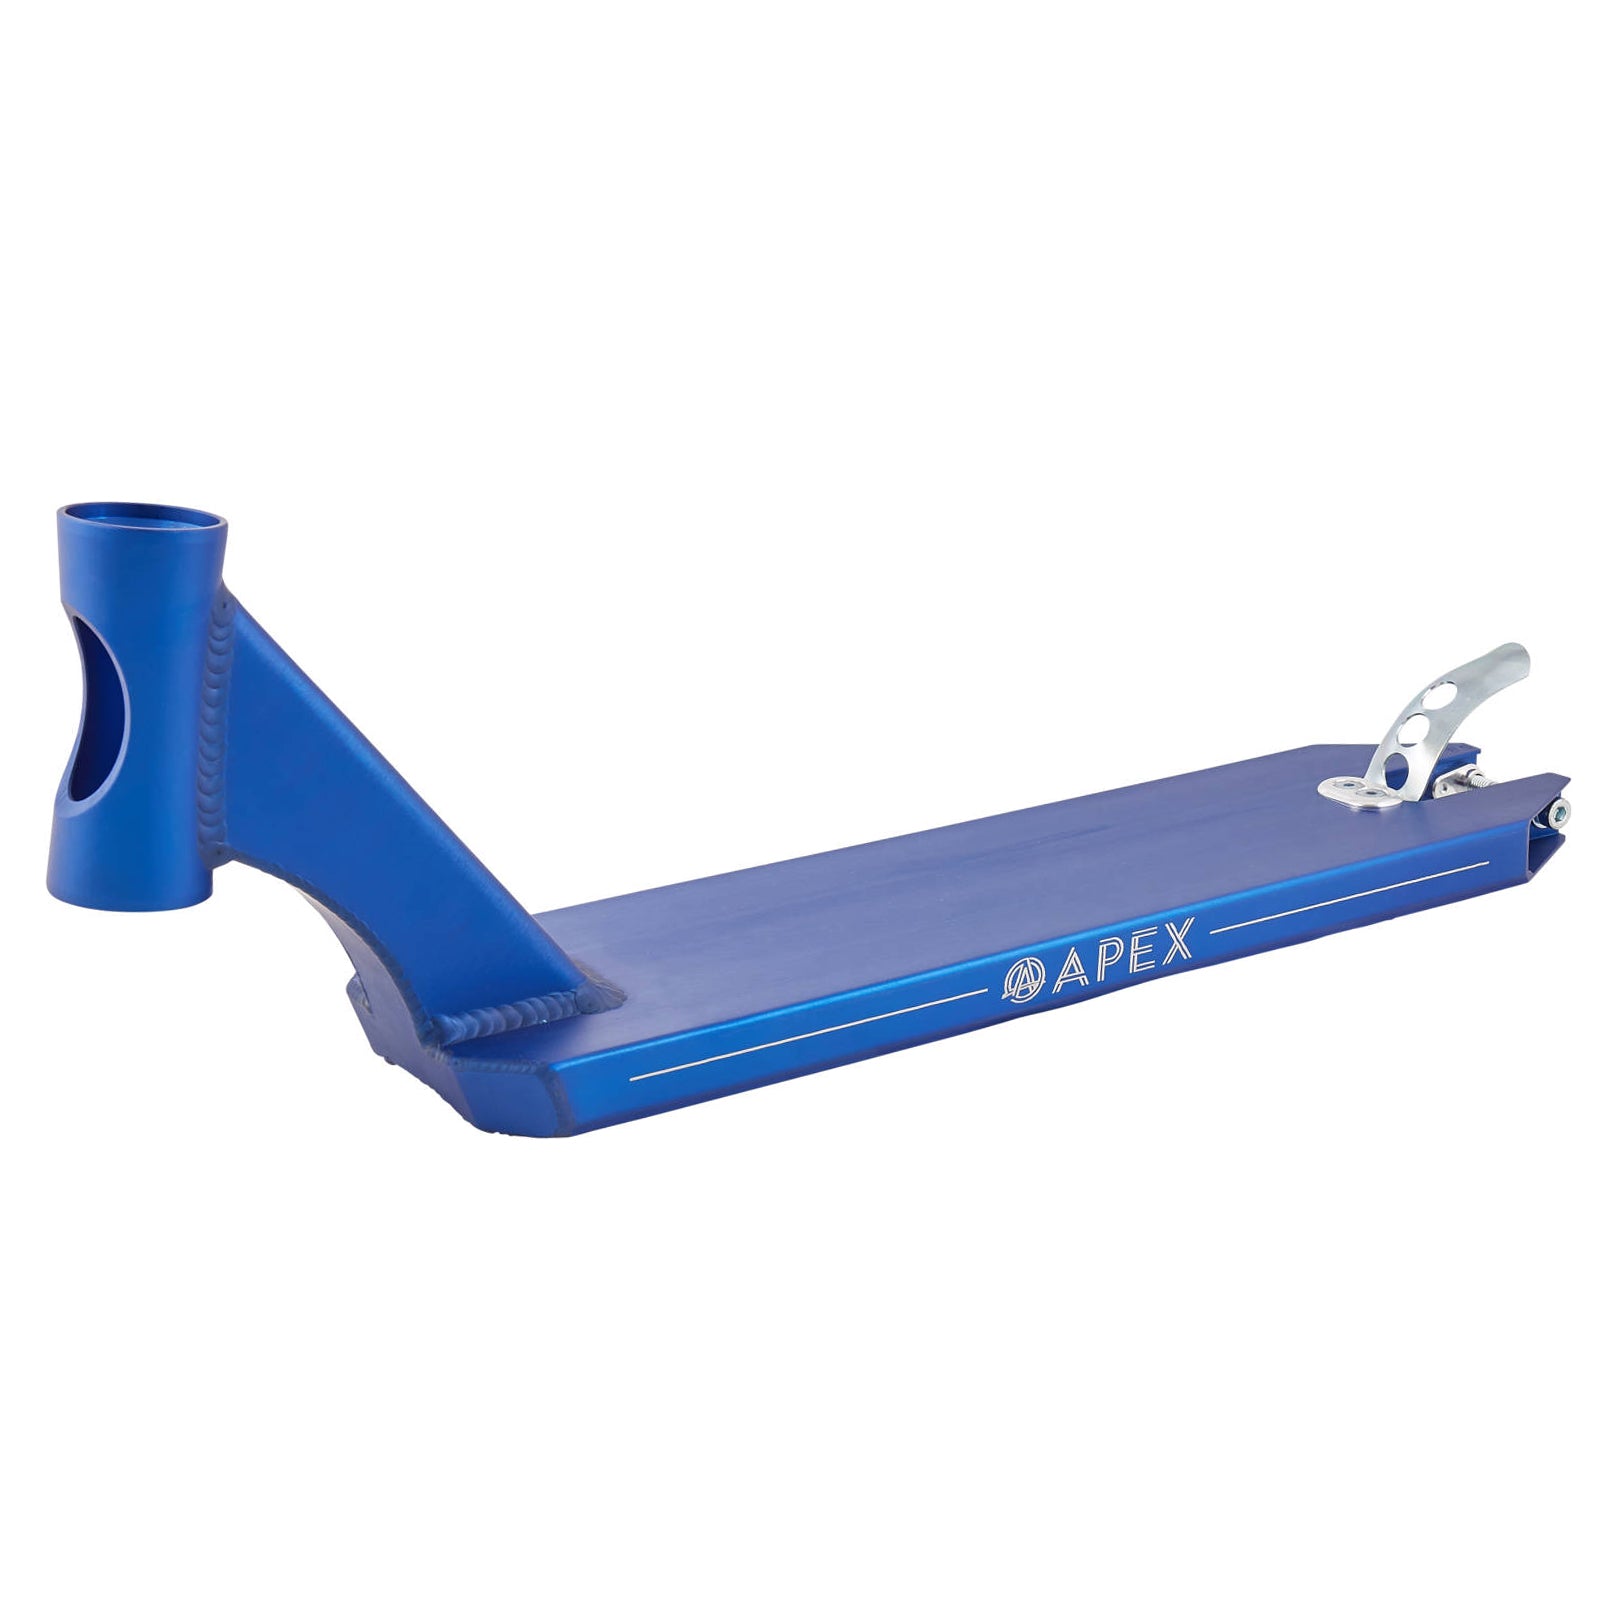 APEX 5" Wide Angled 580mm Deck Blue 